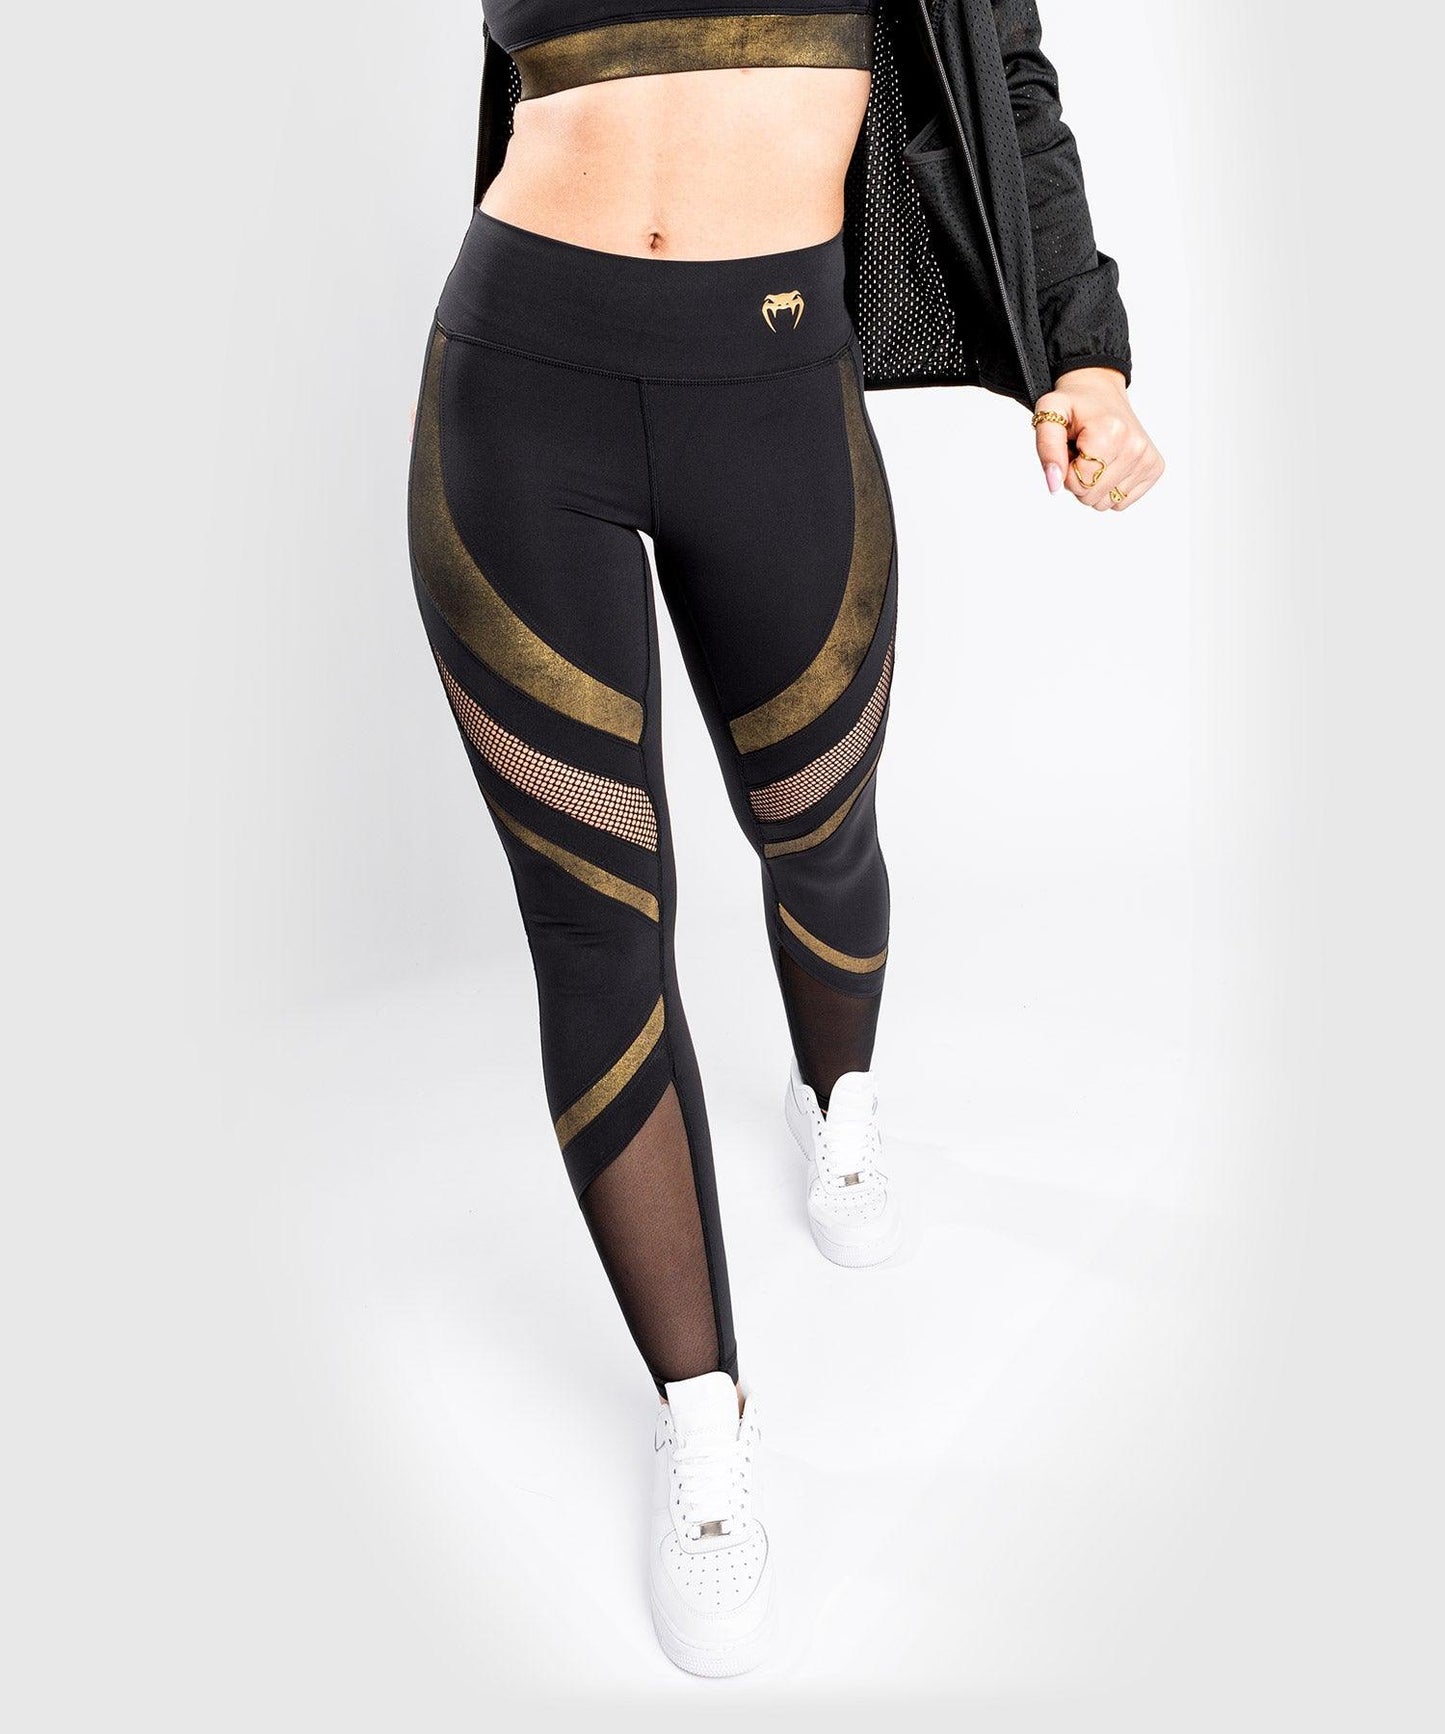  Women's Cross Waist Yoga Leggings, Gym Workout Running Pants  (Black,X-Small,X-Small) : Clothing, Shoes & Jewelry